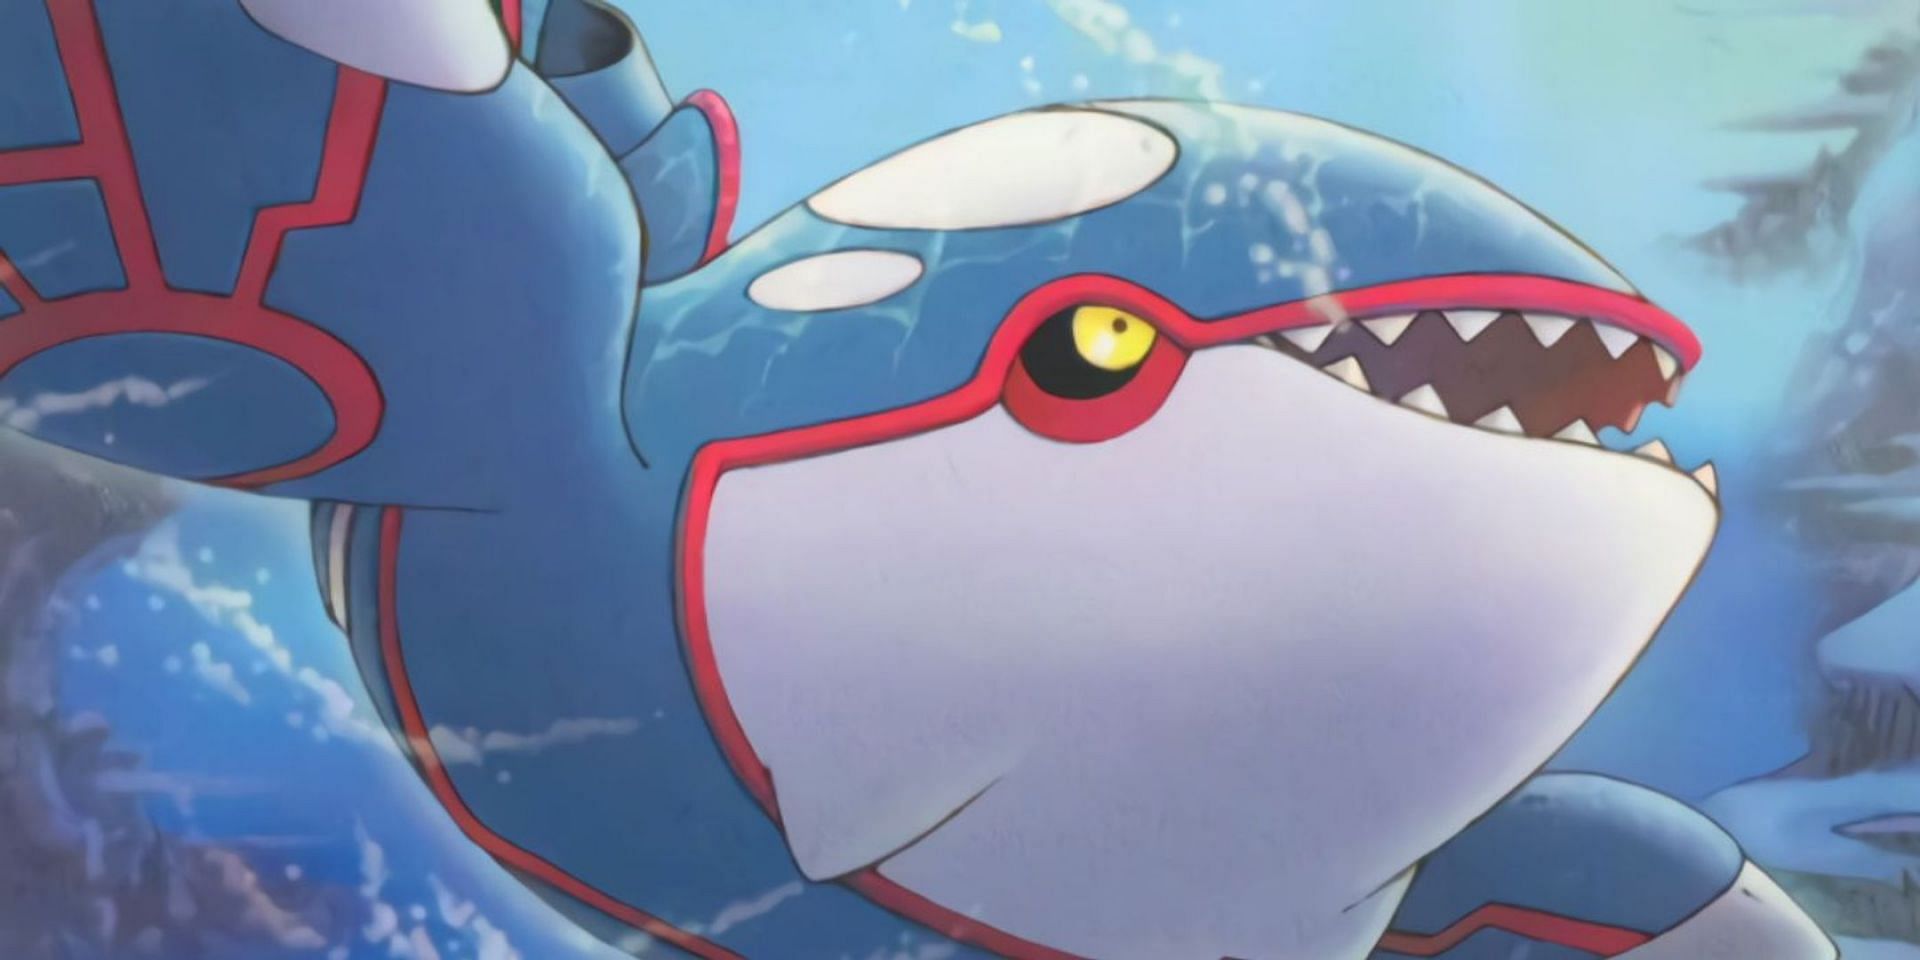 Kyogre as it appears in the Trading Card Game. (Image via The Pokemon Company)